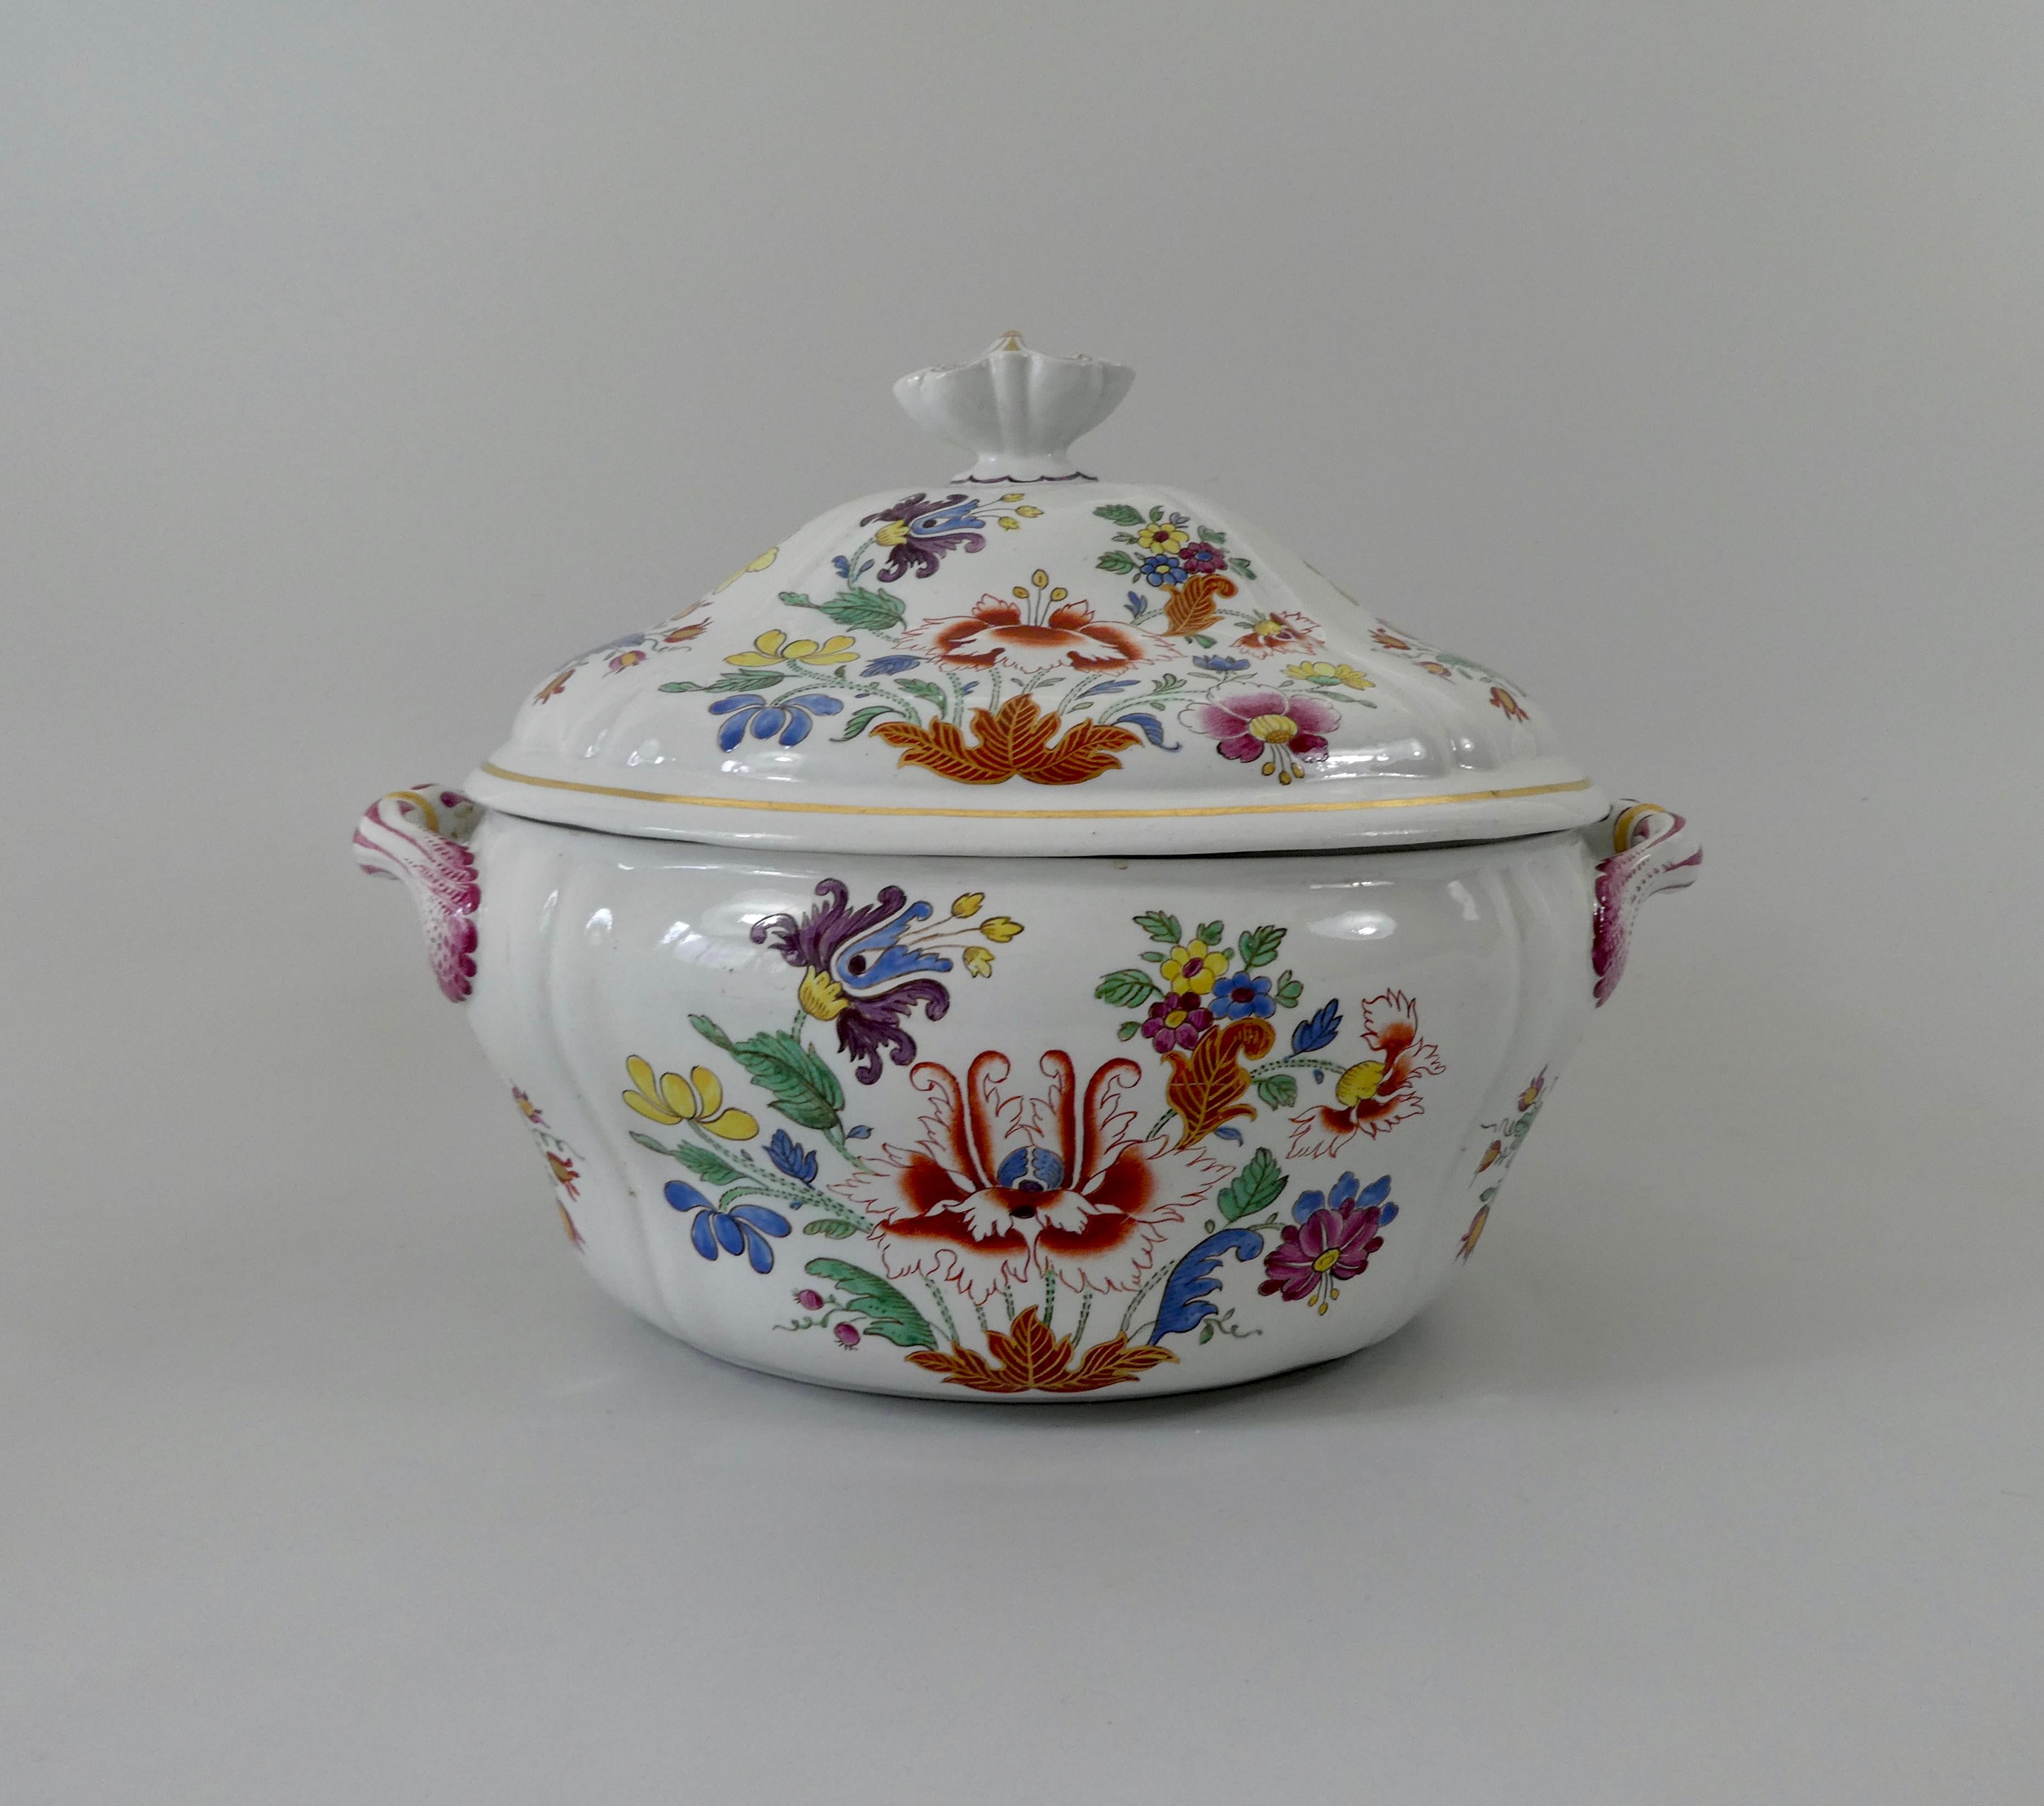 Late 18th Century Doccia Porcelain Tureen, Cover and Stand, Tulipano Pattern, circa 1770